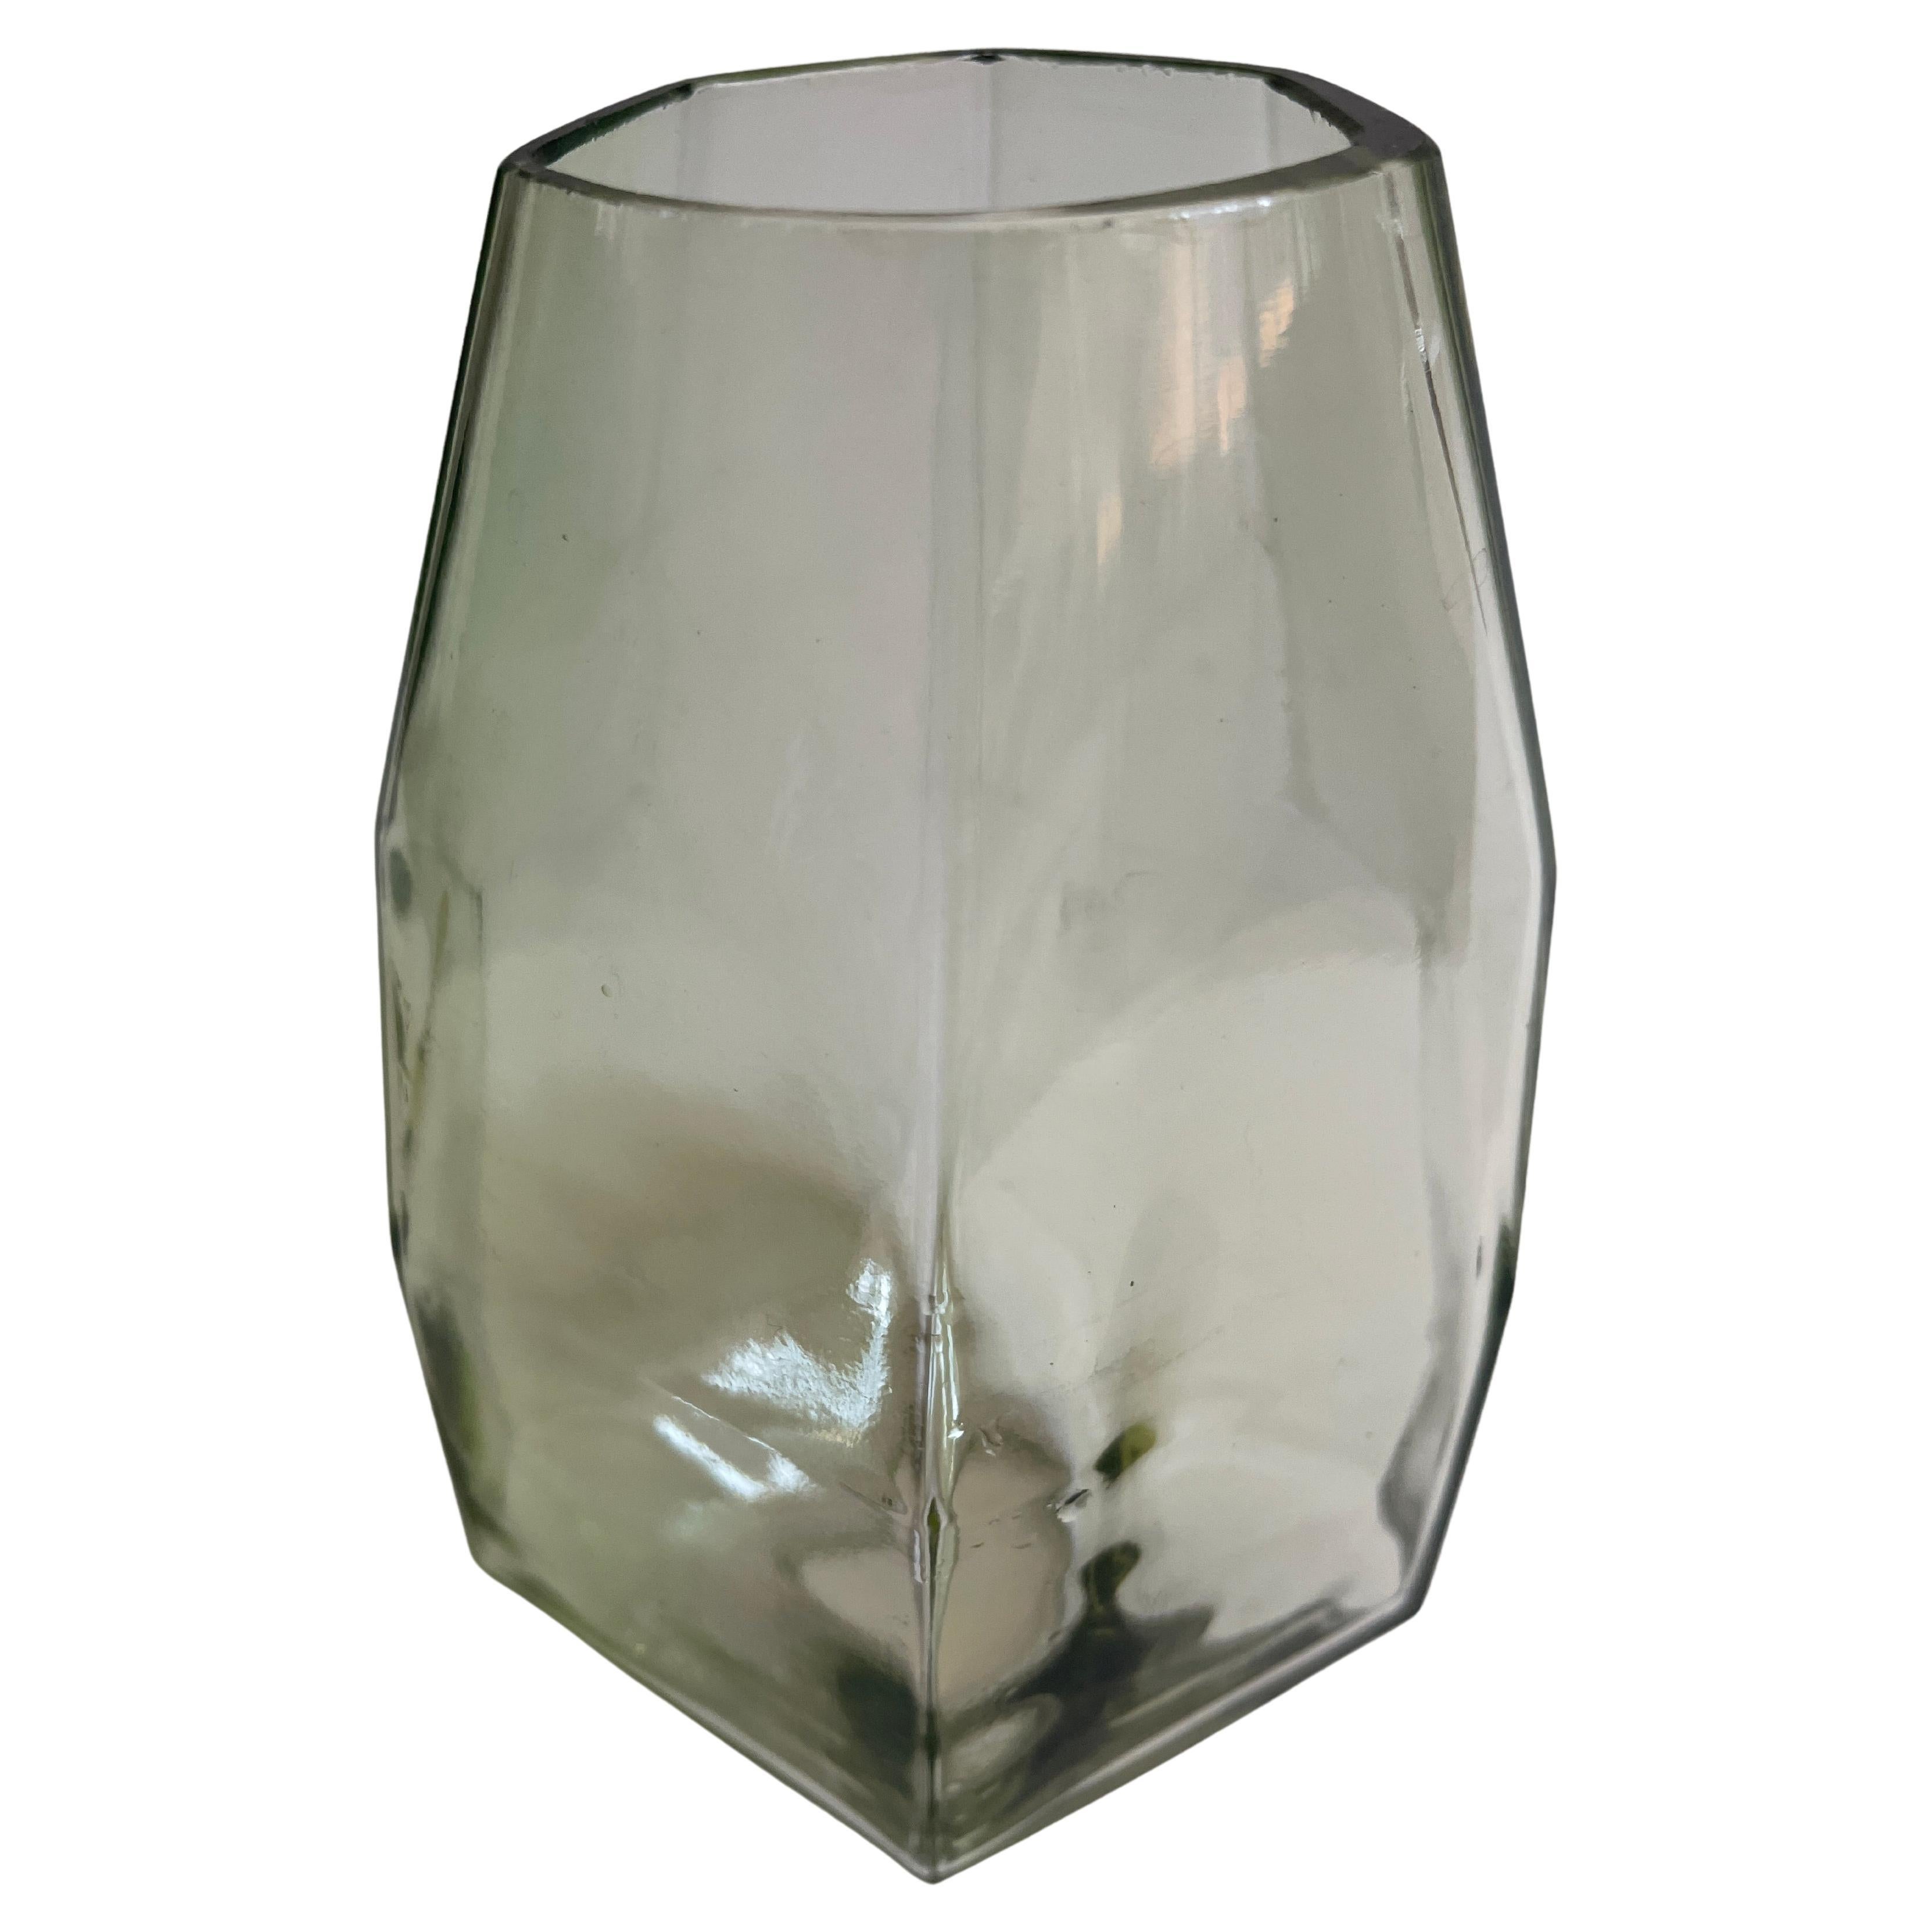 Polyhedric Danish glass vase has an ethereal celadon color, catching the light at many angles.